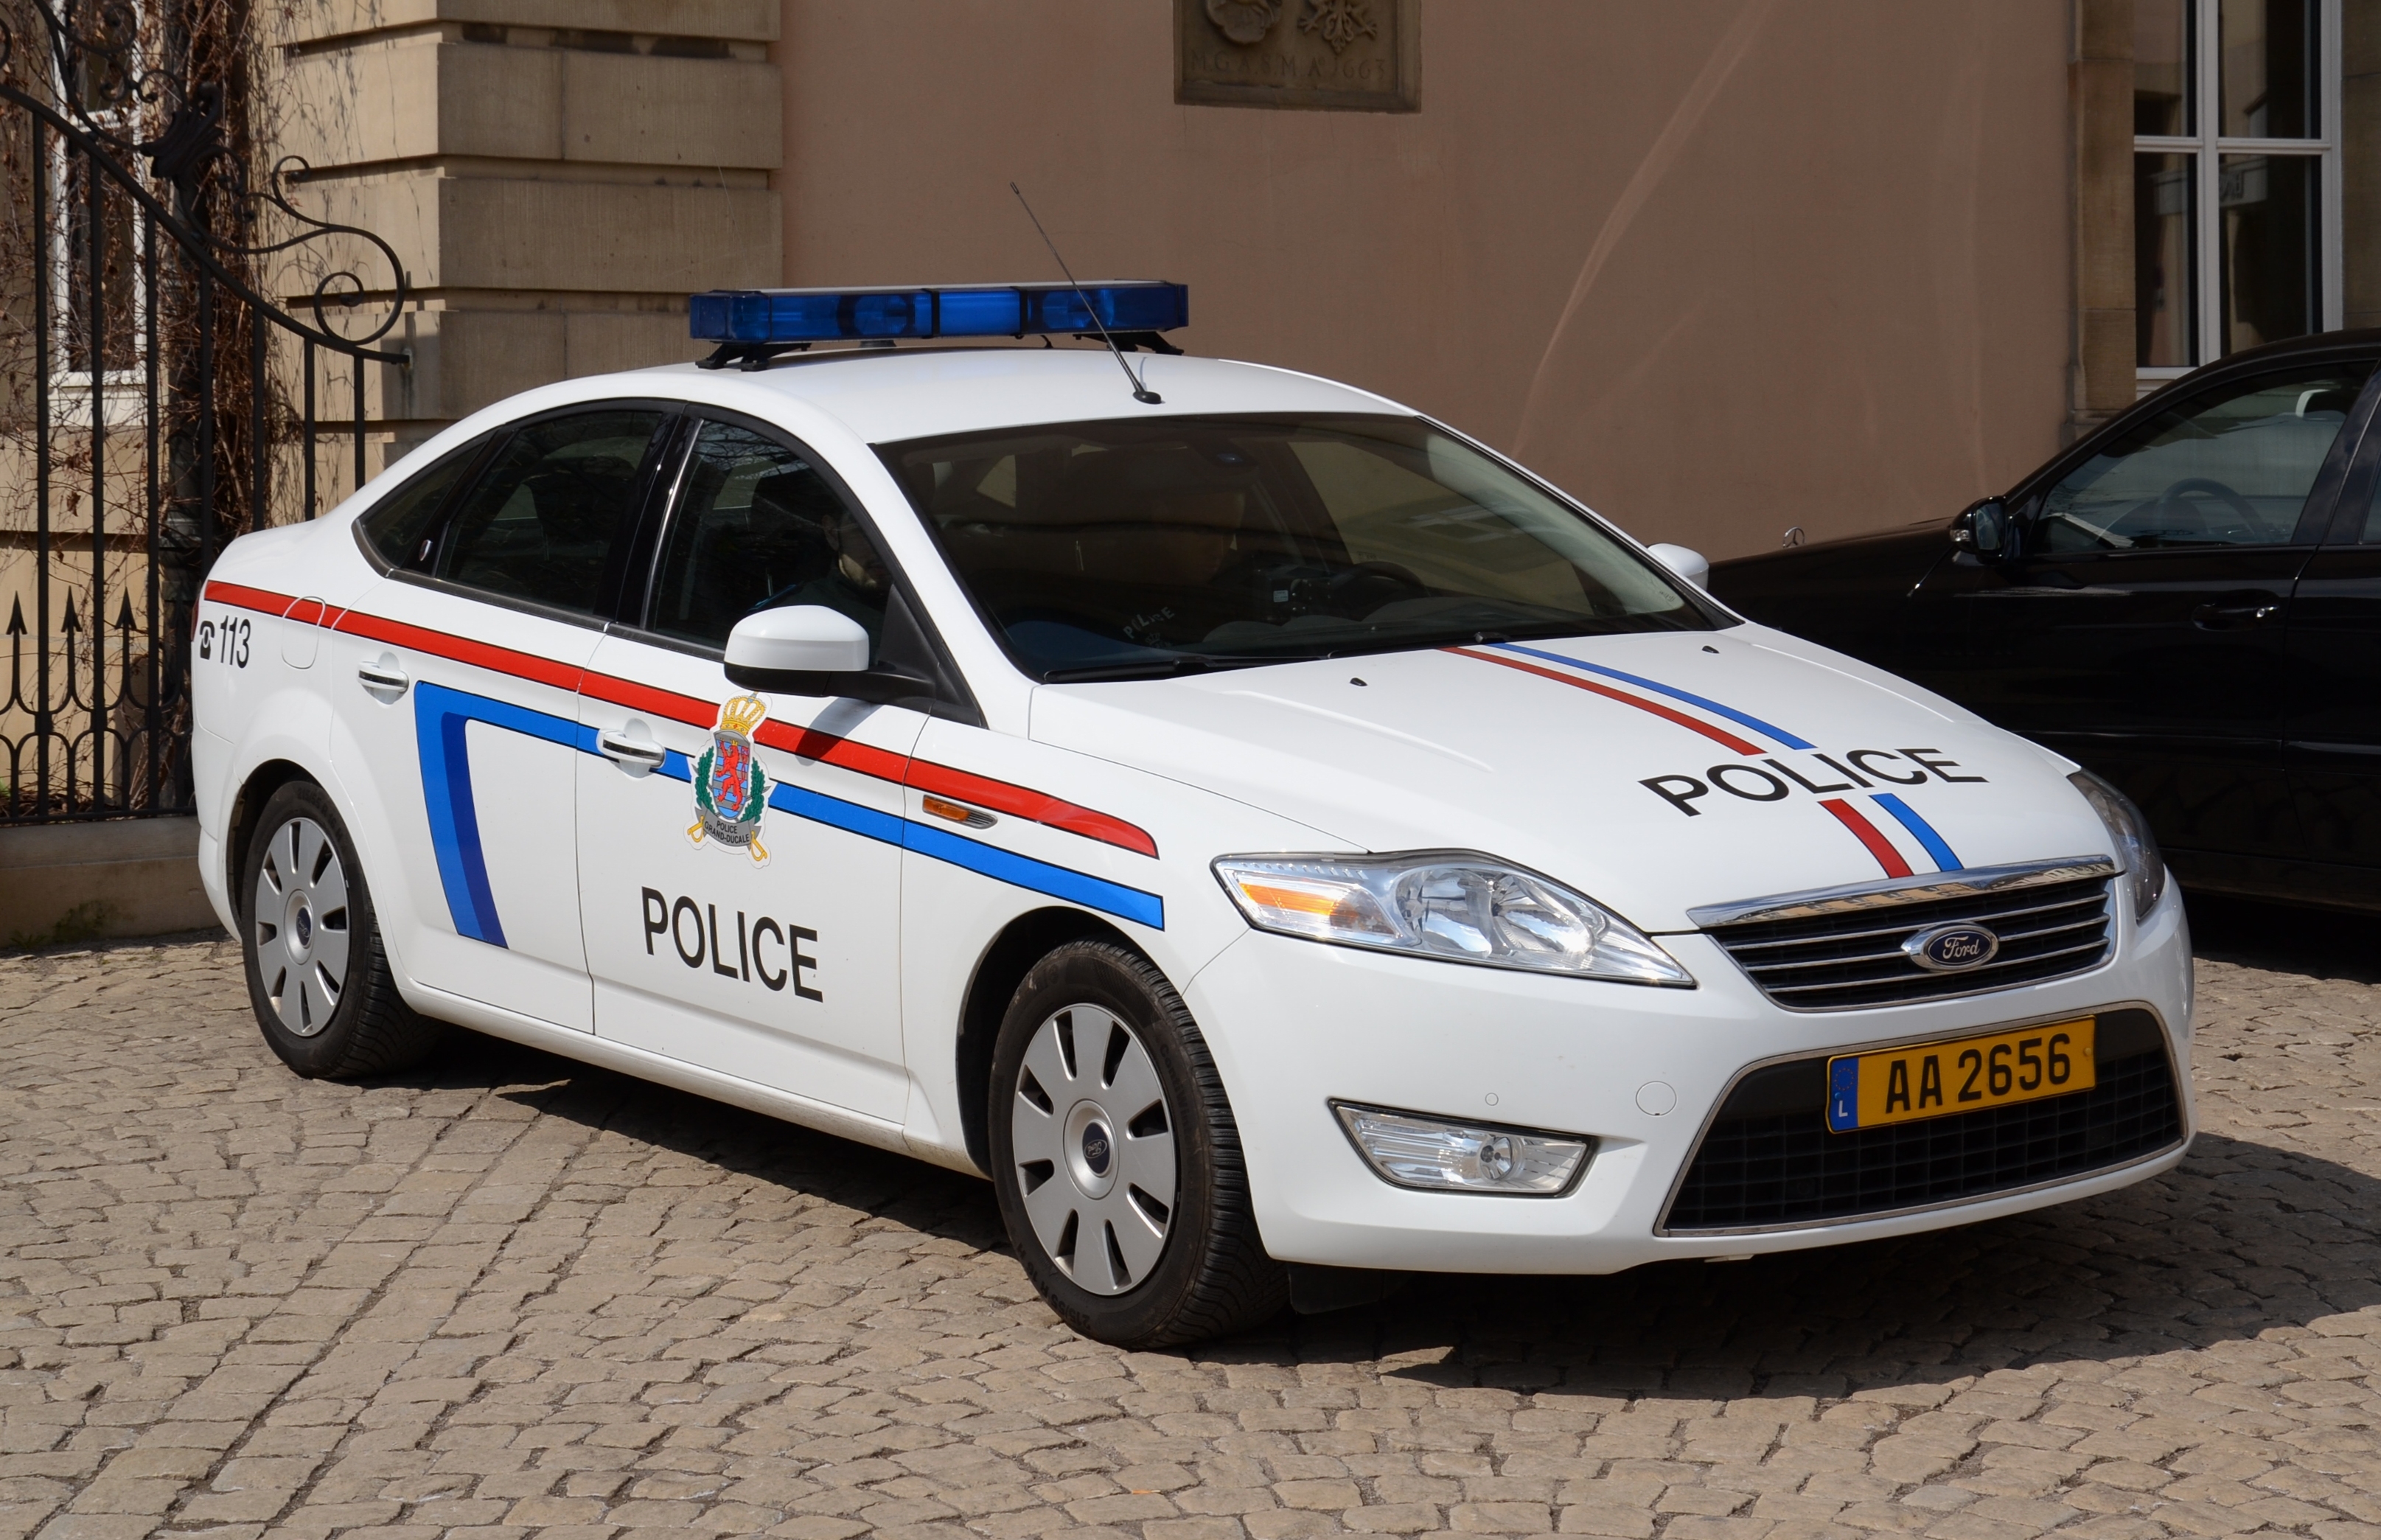 Grand Ducal Police car (Ford) in Luxembourg City